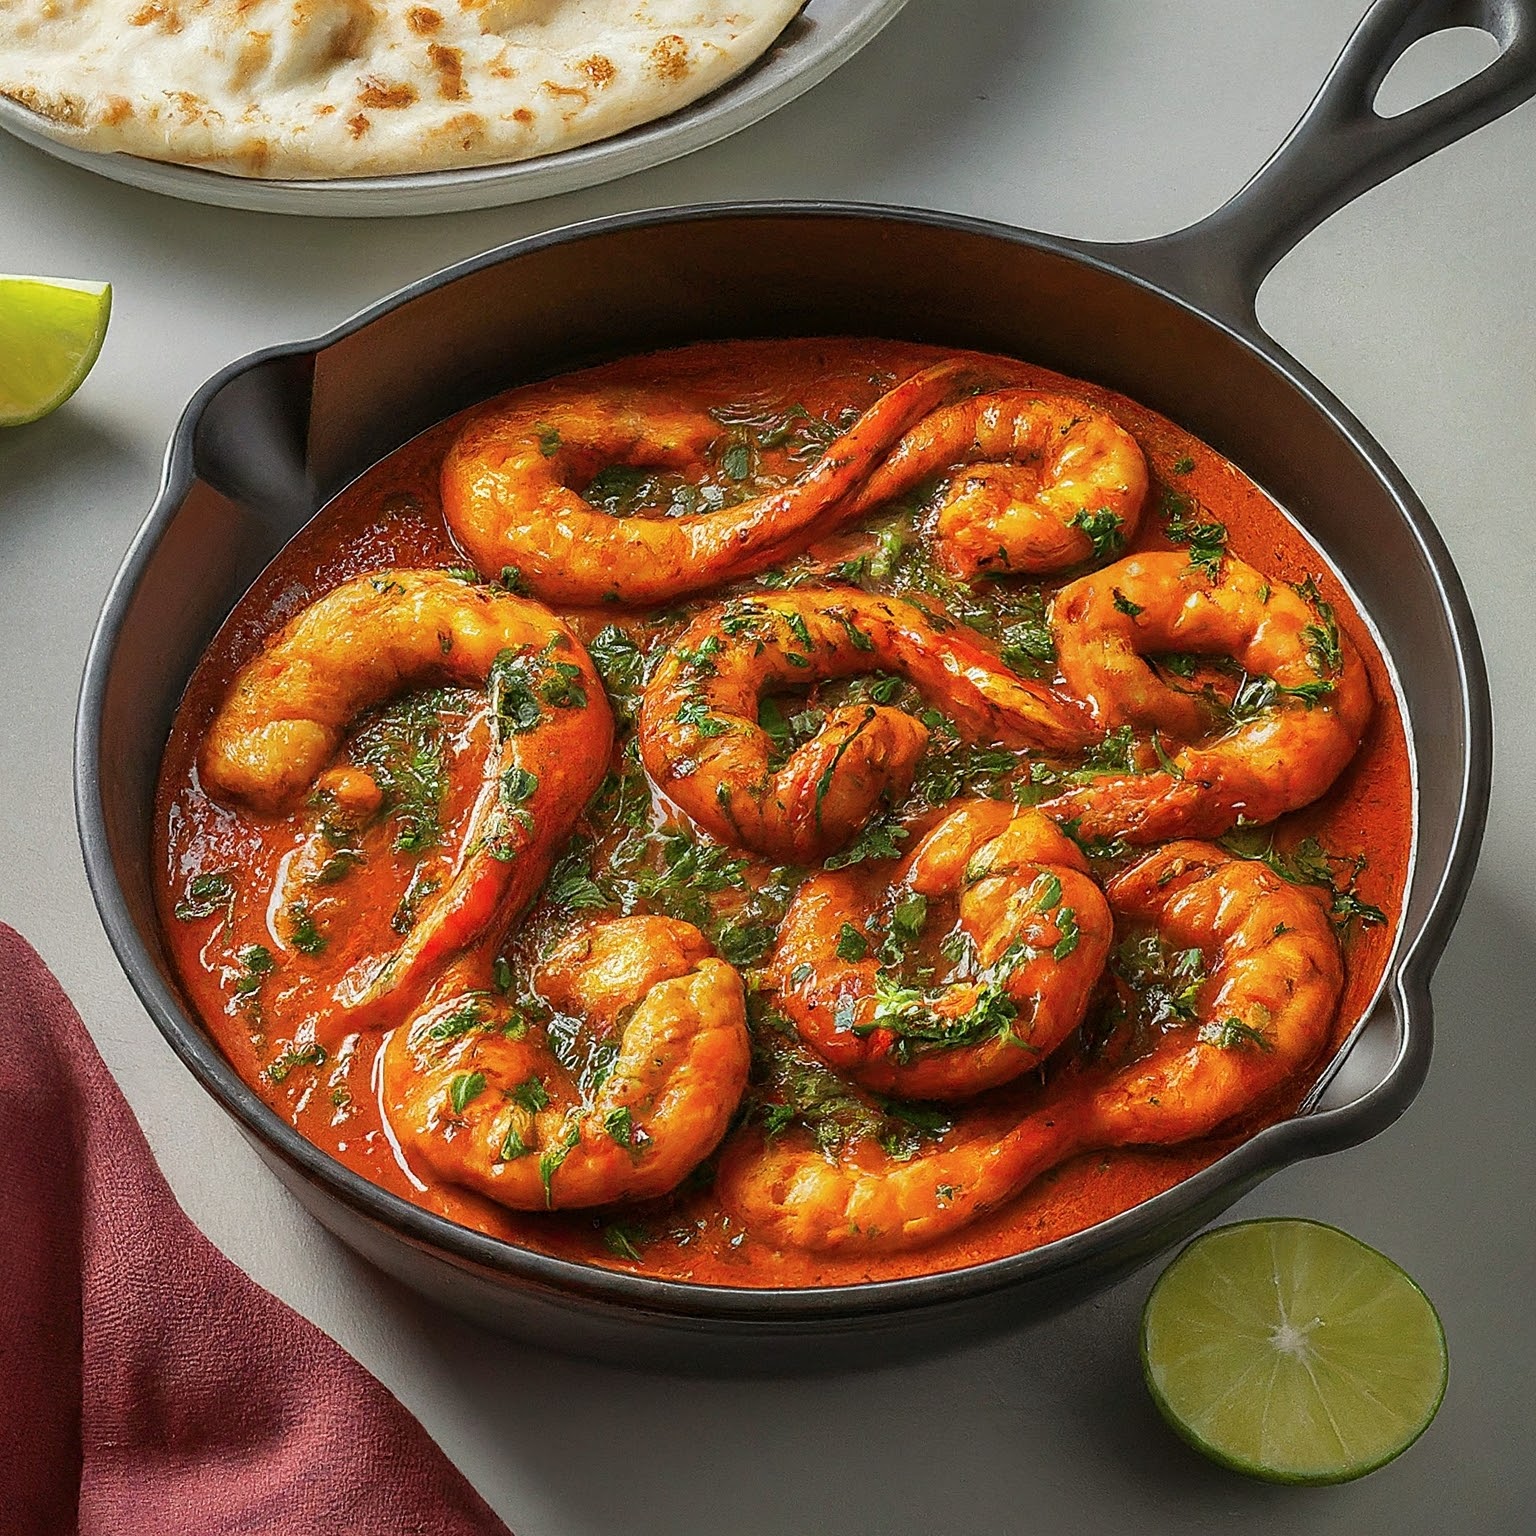 A close-up of a cast iron skillet filled with Andhra Spicy Prawn Iguru, a dish with prawns in a fiery red gravy.